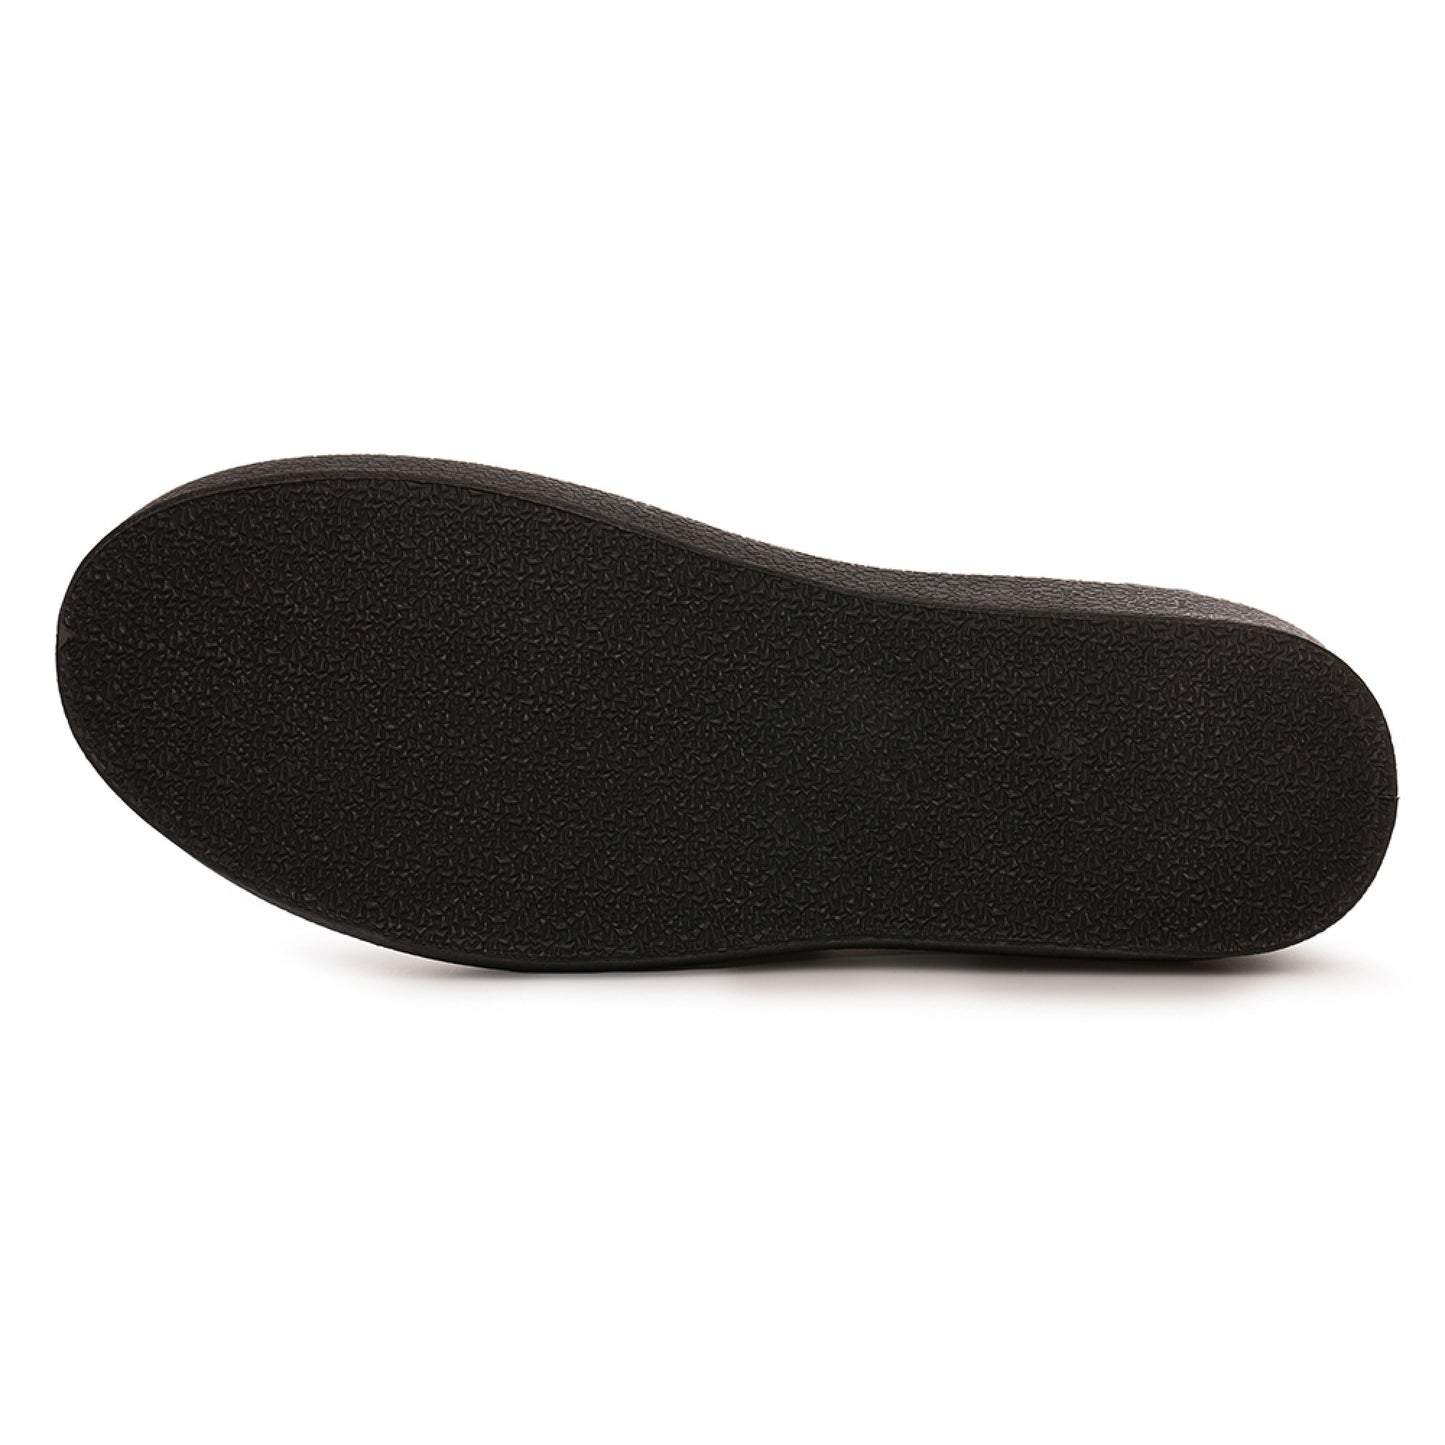 Men's Cord Adjustable Easy Close Bootie Slippers with Fleece Lining